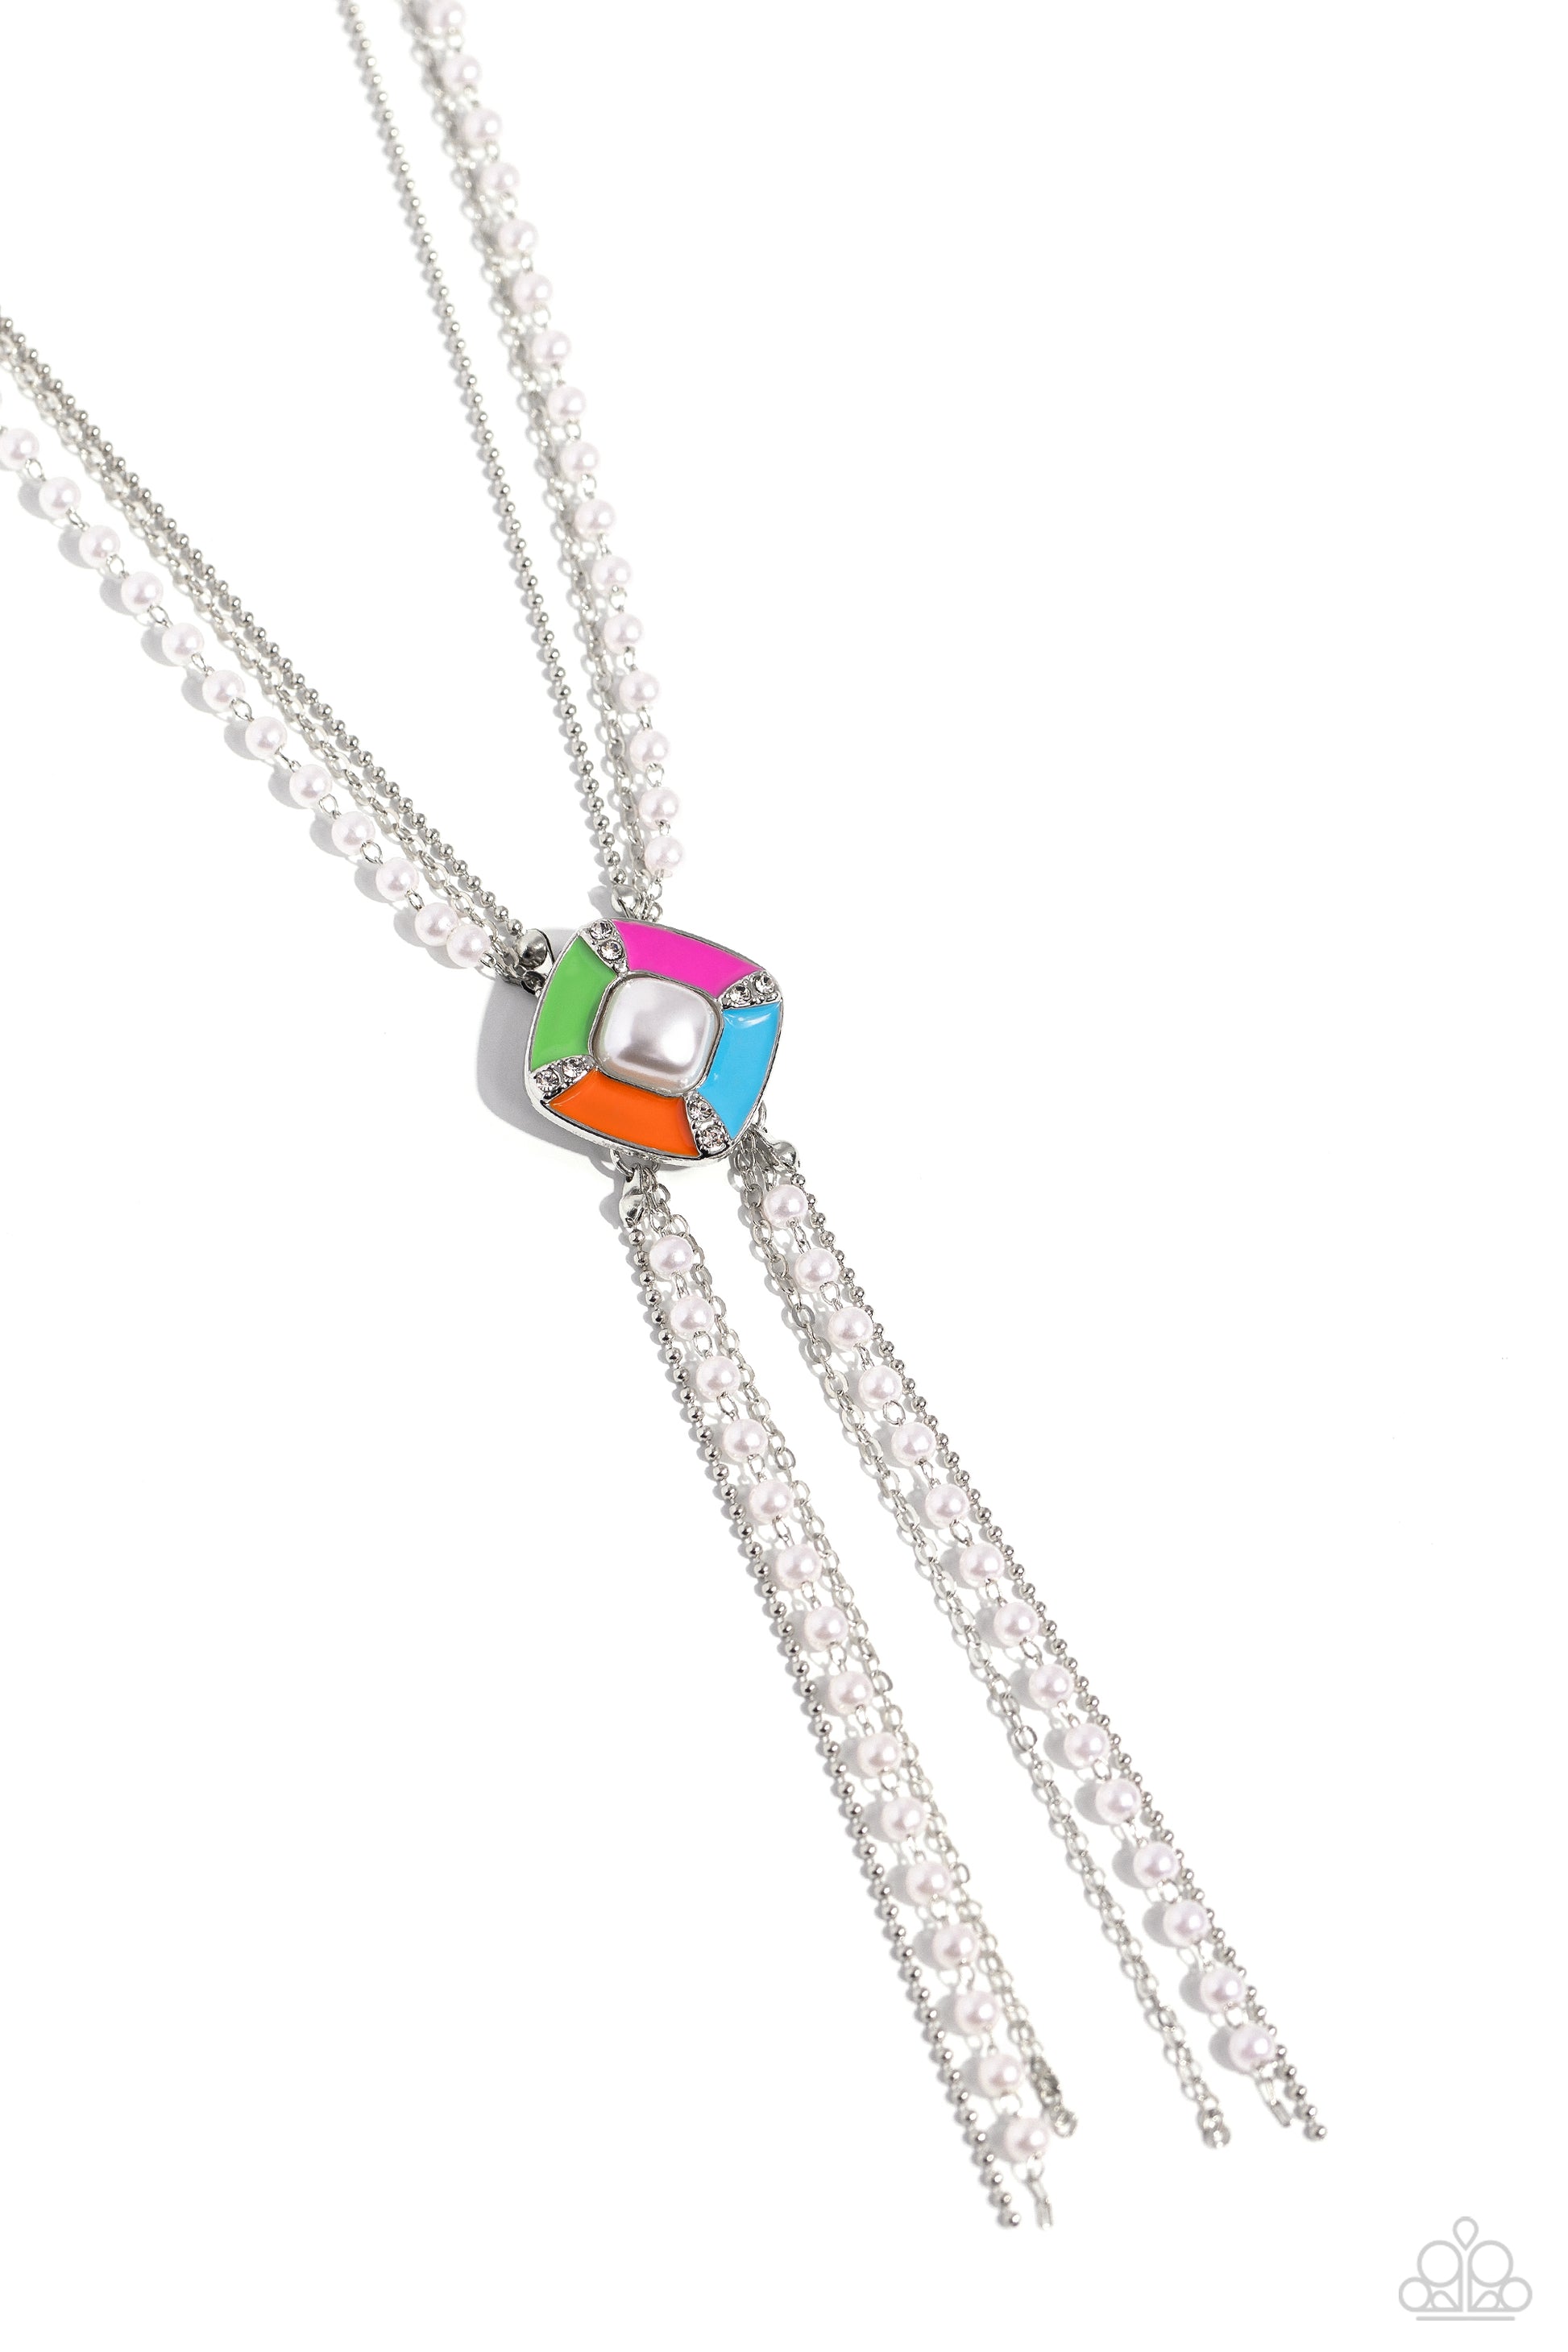 I Pinky SQUARE Multi Pearl Necklace - Paparazzi Accessories  A dainty silver chain, silver ball chain, and pearl-infused chain are attached to a tilted, multicolored-painted square pendant. Spanning around its pearly center, white rhinestones glisten along the corners of the square pendant while tassels of the three chains cascade from the bottom in two places for a refined centerpiece. Features an adjustable clasp closure.